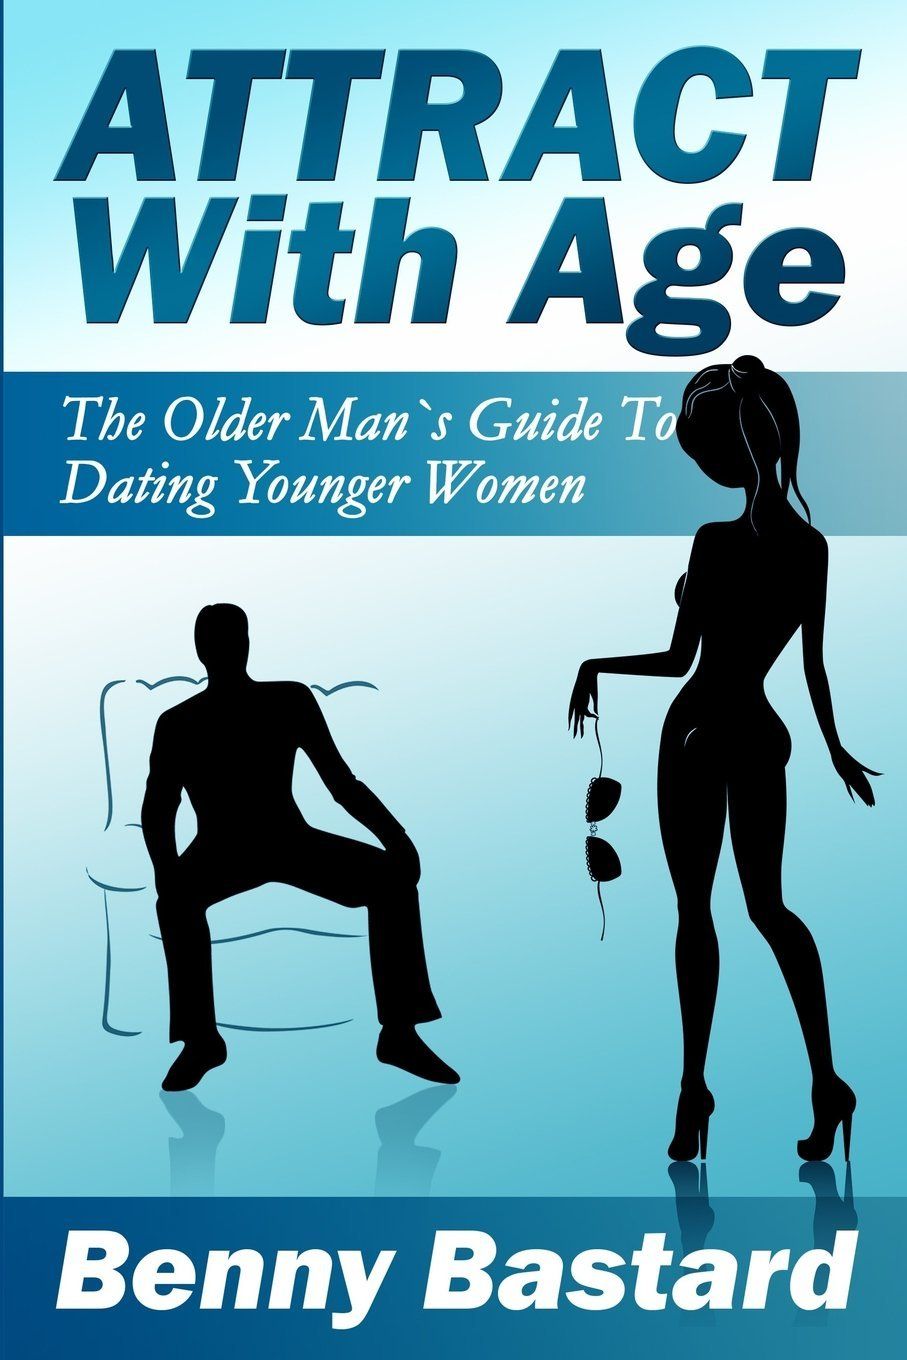 best of Dating Guide an man to older